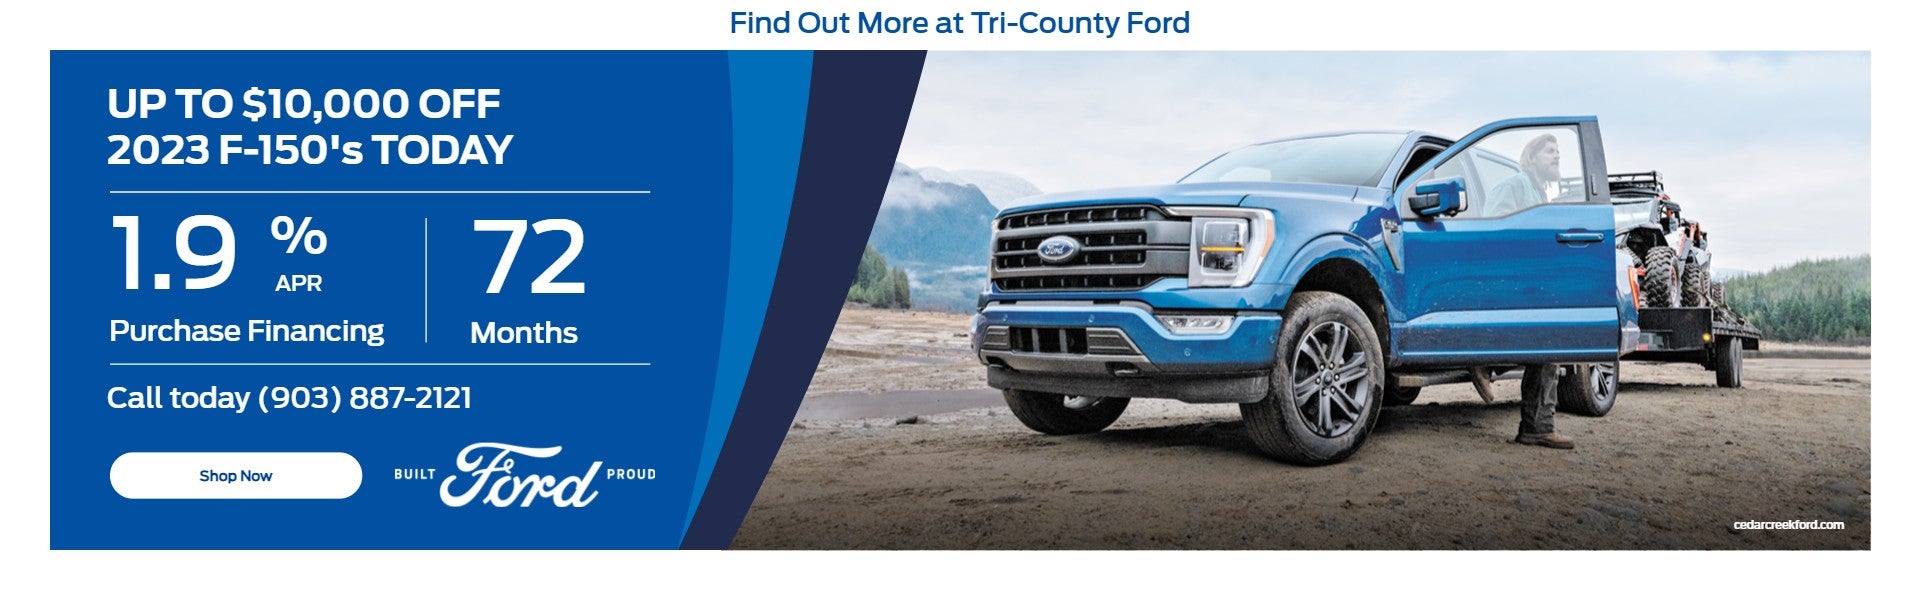 UP TO $10,000 OFF 2023 F-150's TODAY